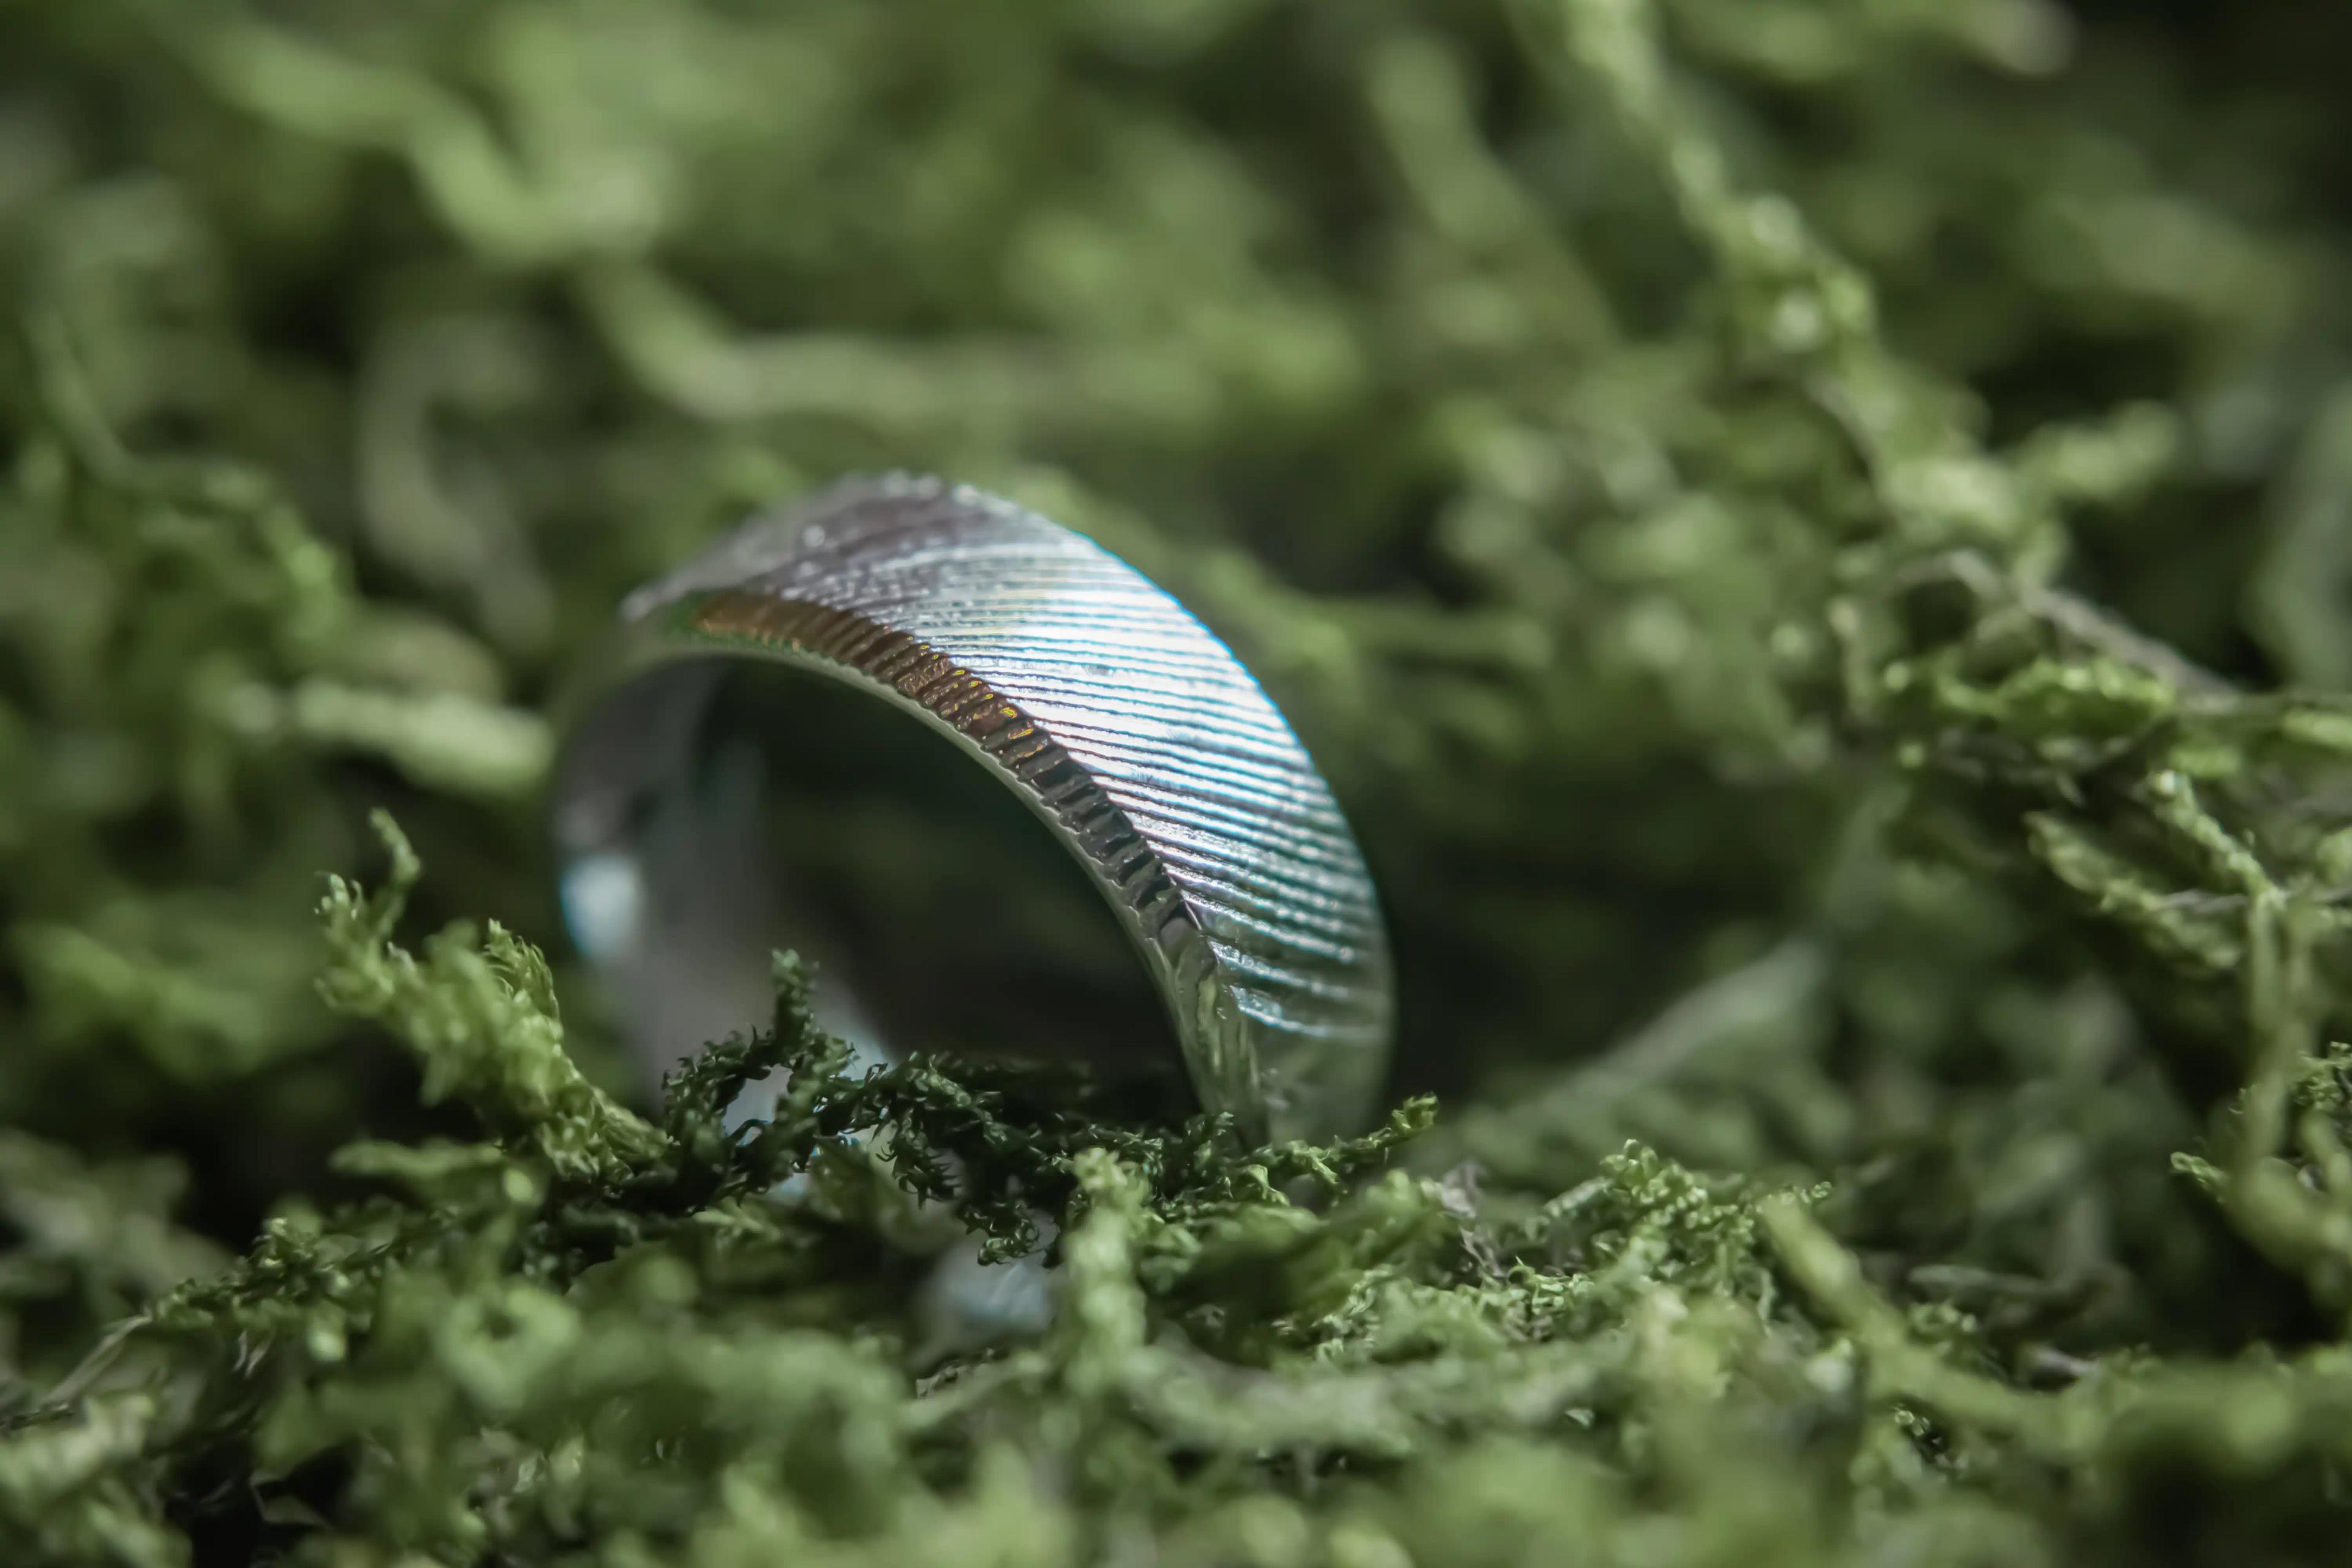 A close-up shot of the grooms ring surrounded by green foliage.